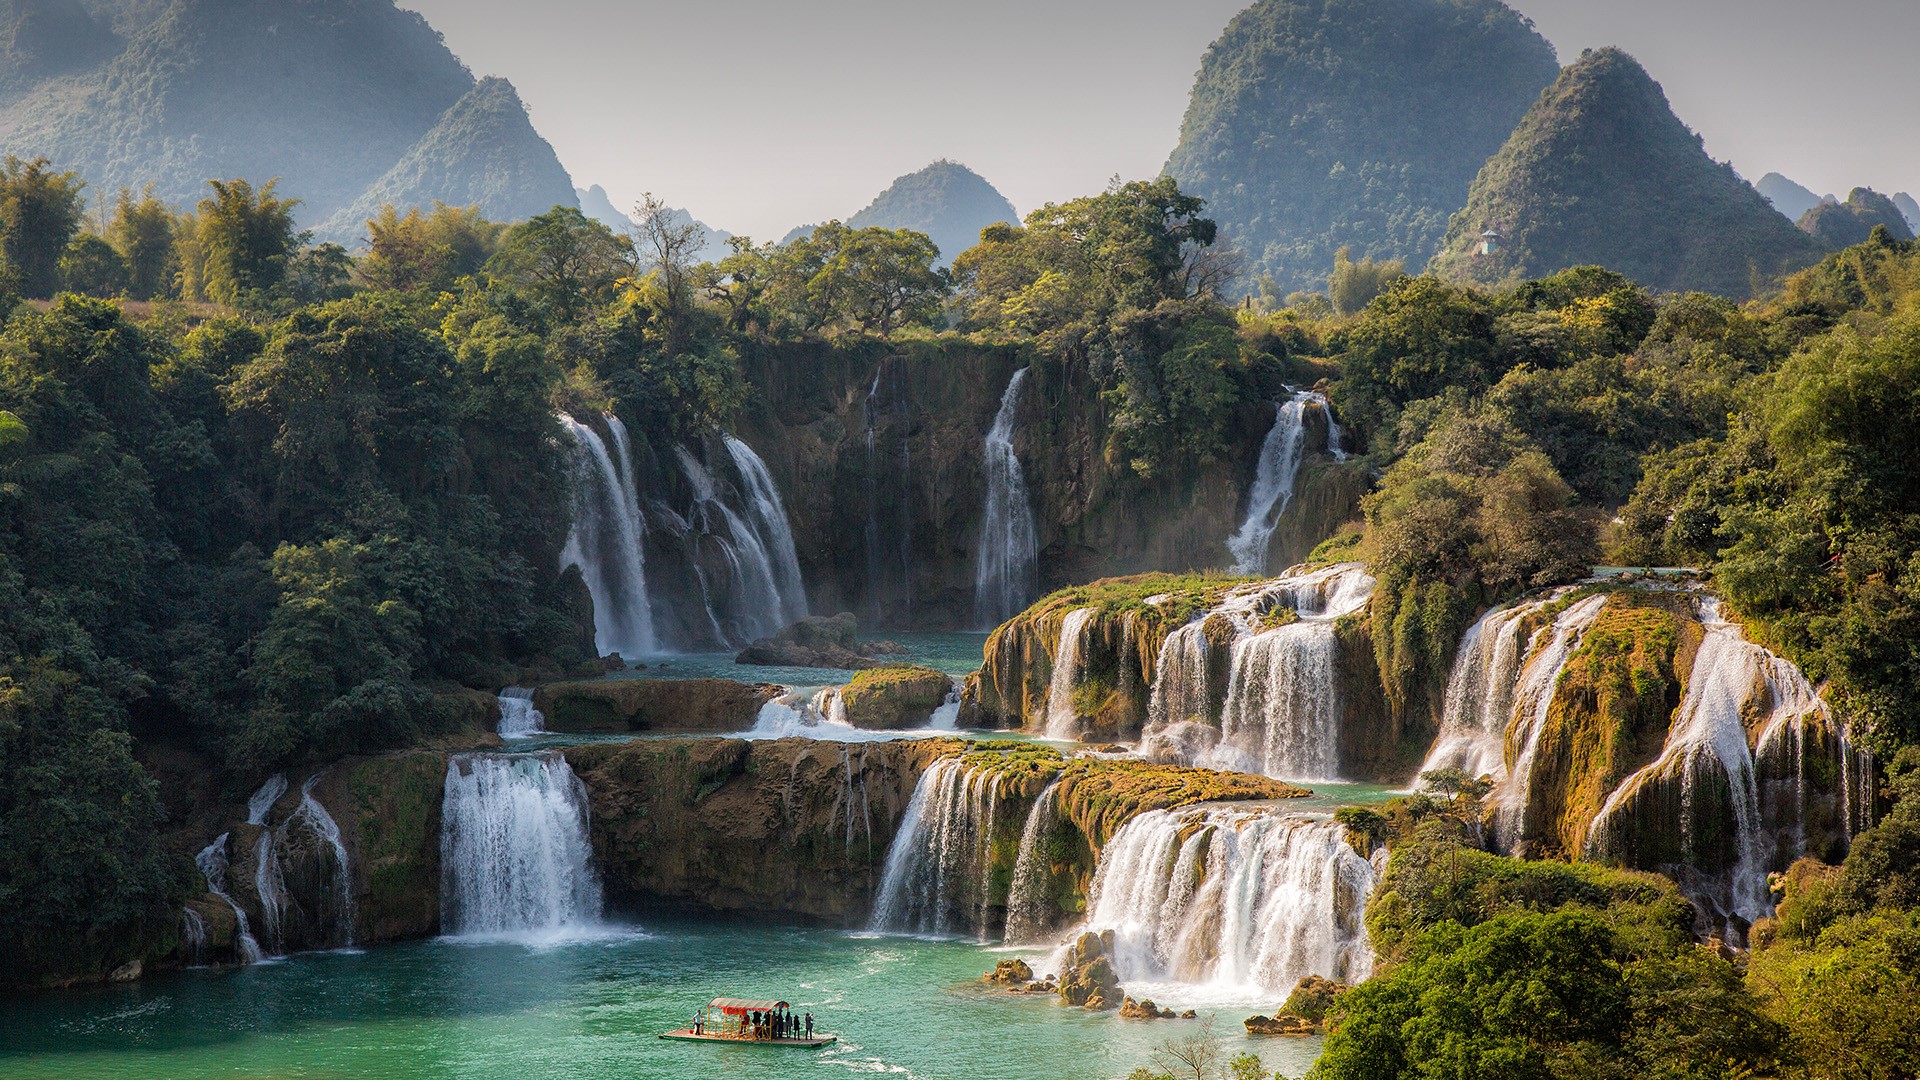 General 1920x1080 lake landscape China Vietnam forest mountains water boat Detian Falls Quây Sơn River trees waterfall